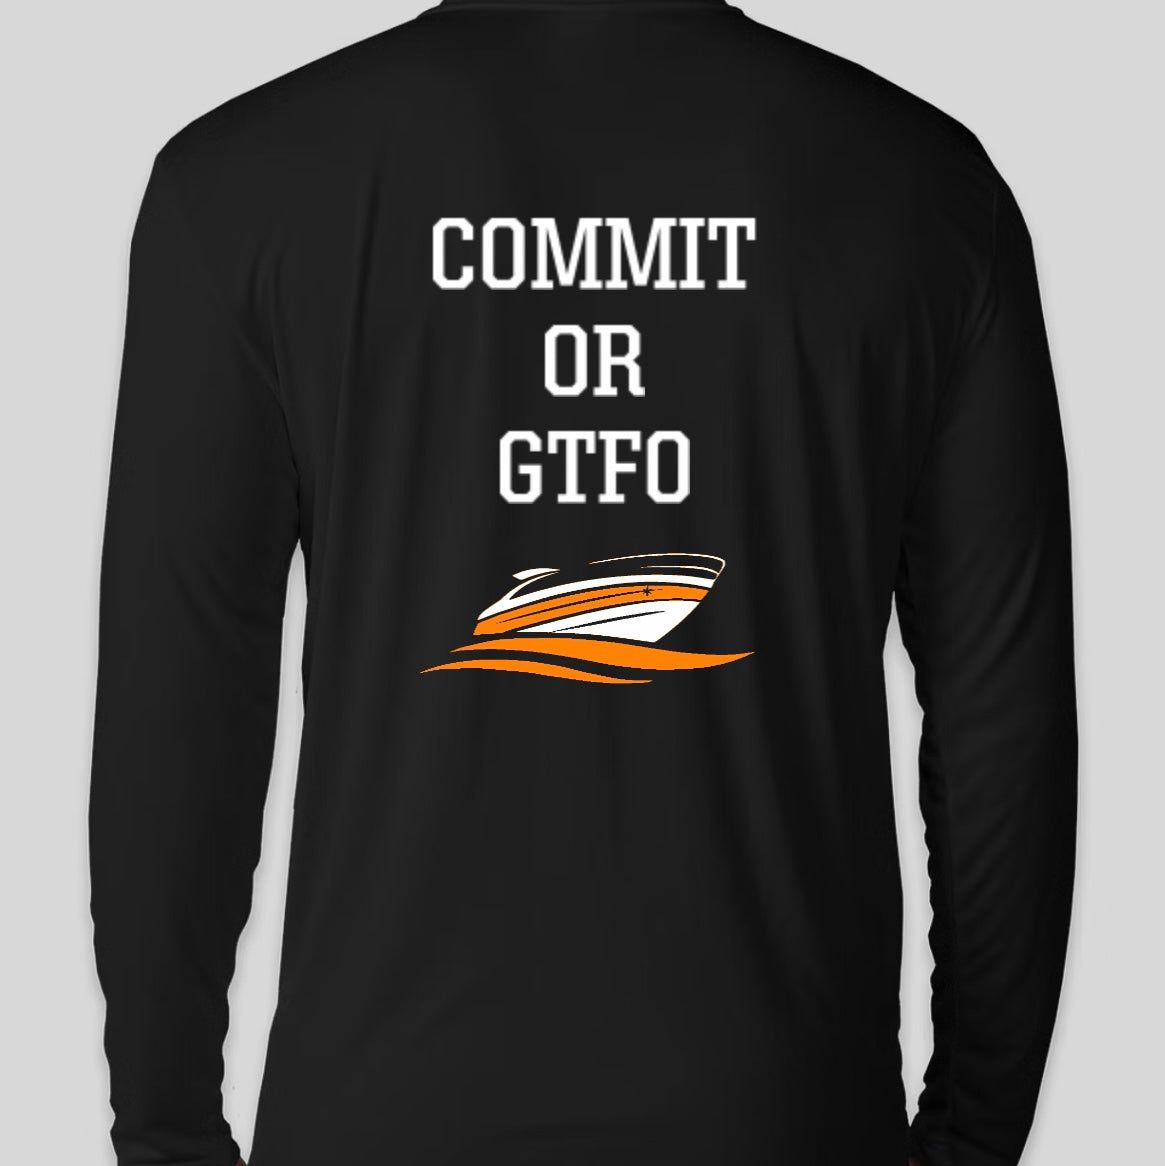 Commit or GTFO - 1% Long Sleeve